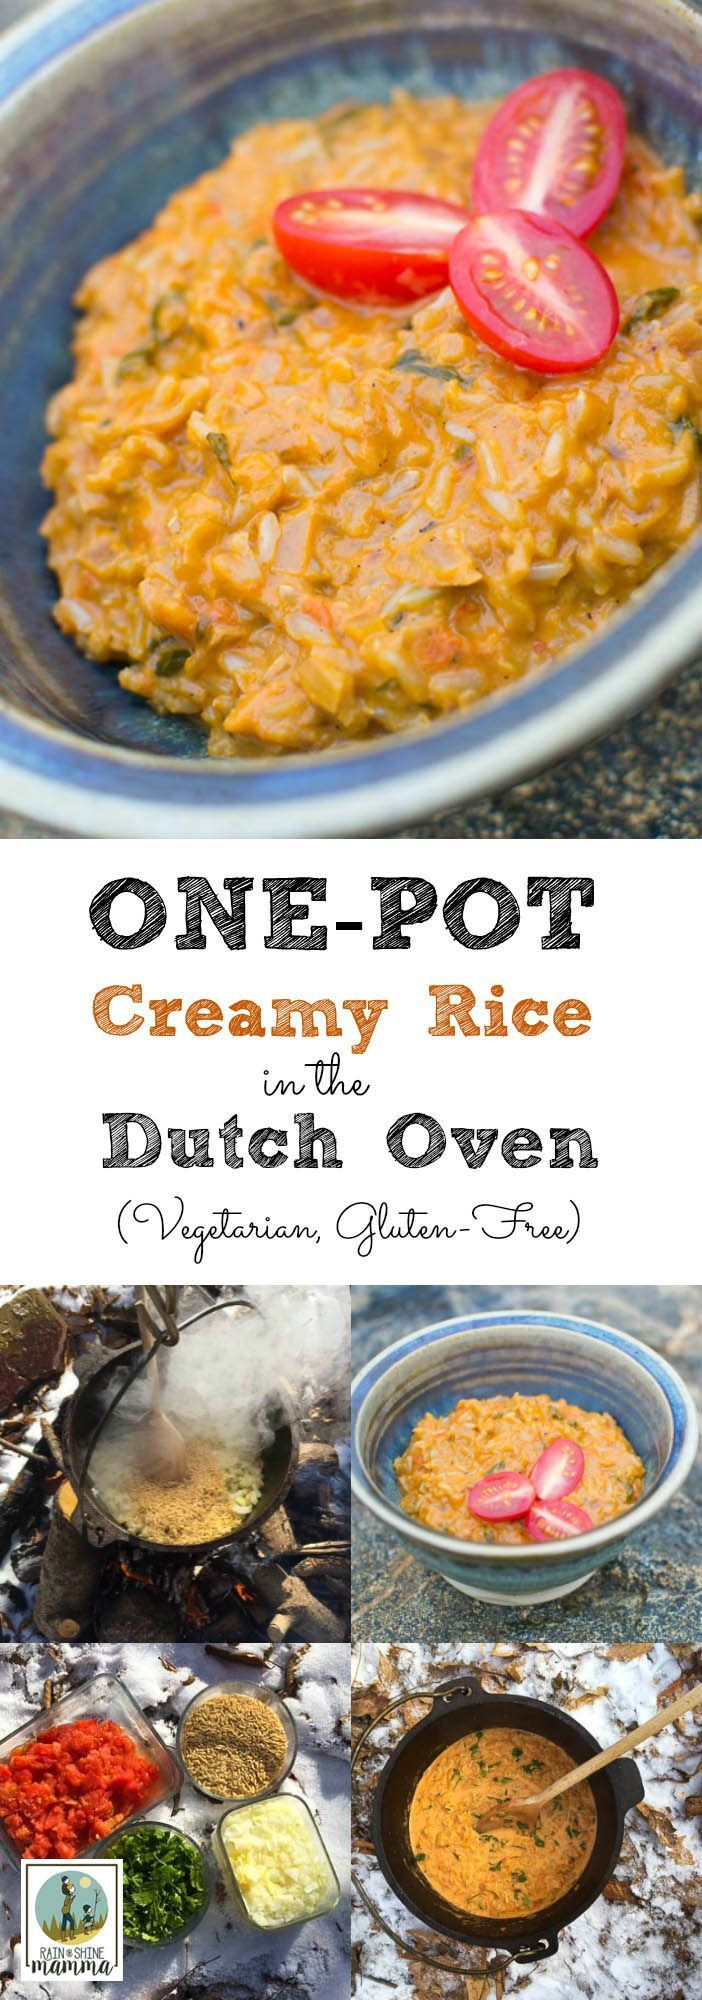 Vegan Dutch Oven Camping Recipes
 17 Best images about Healthy Camping Recipes on Pinterest